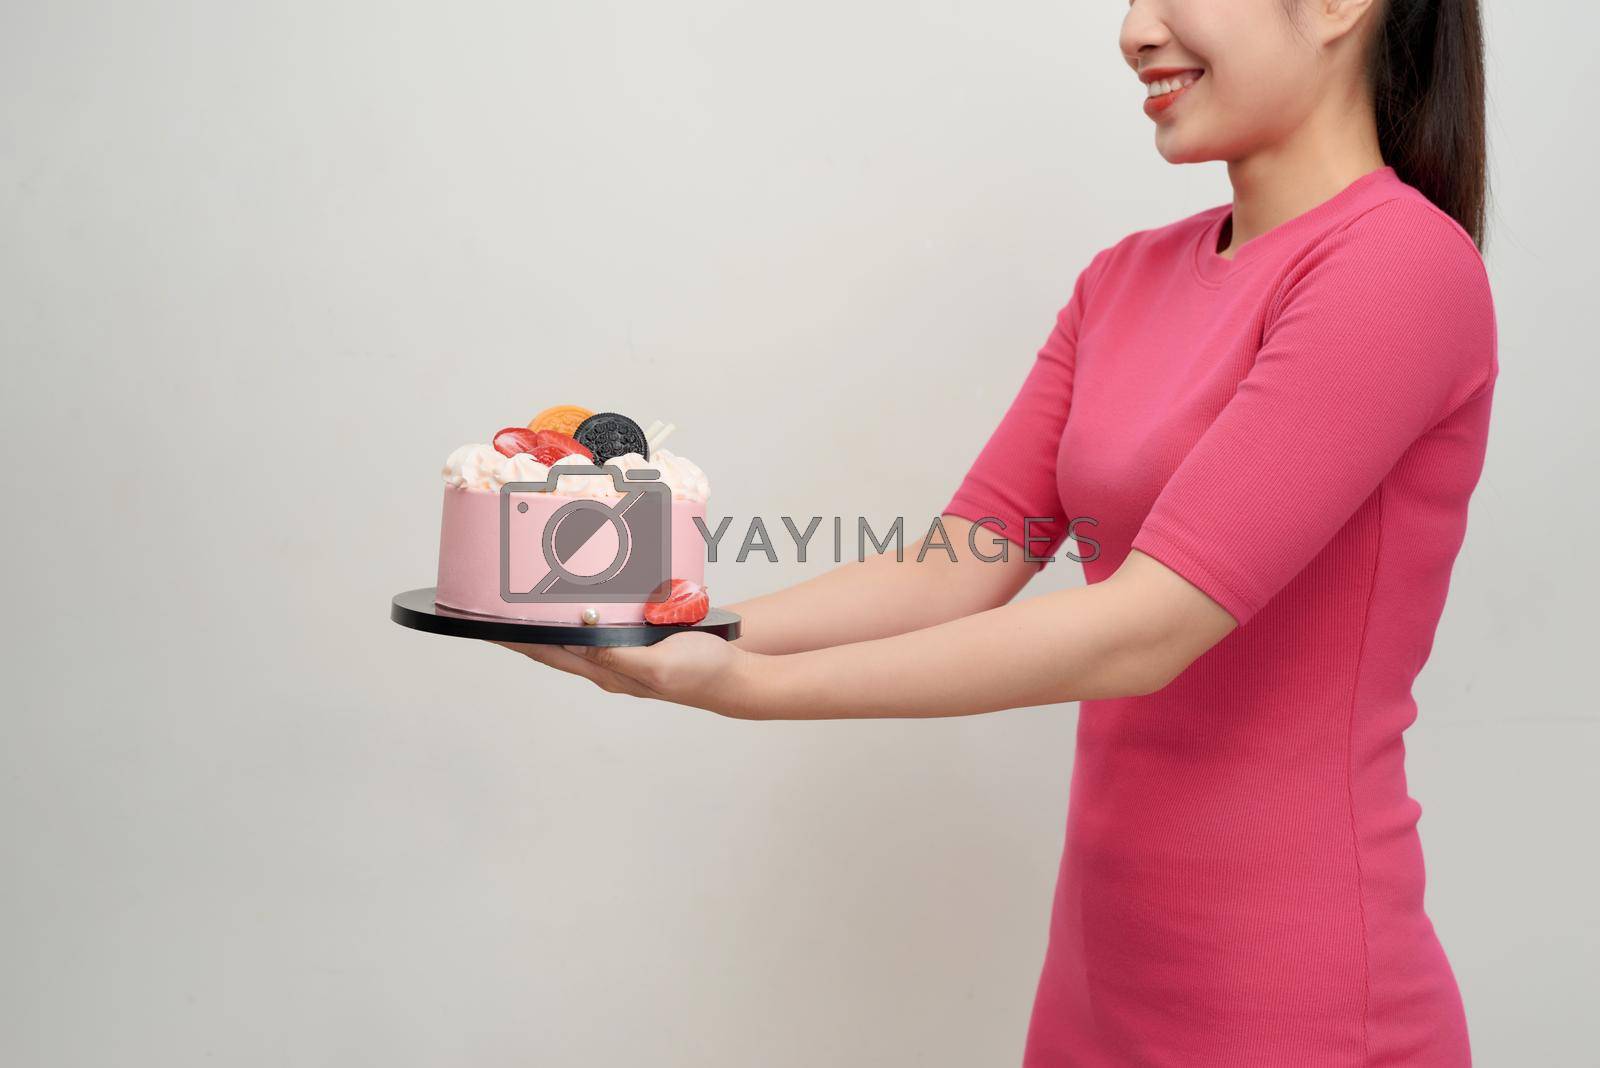 Royalty free image of Woman holds birthday cake in her hands by makidotvn